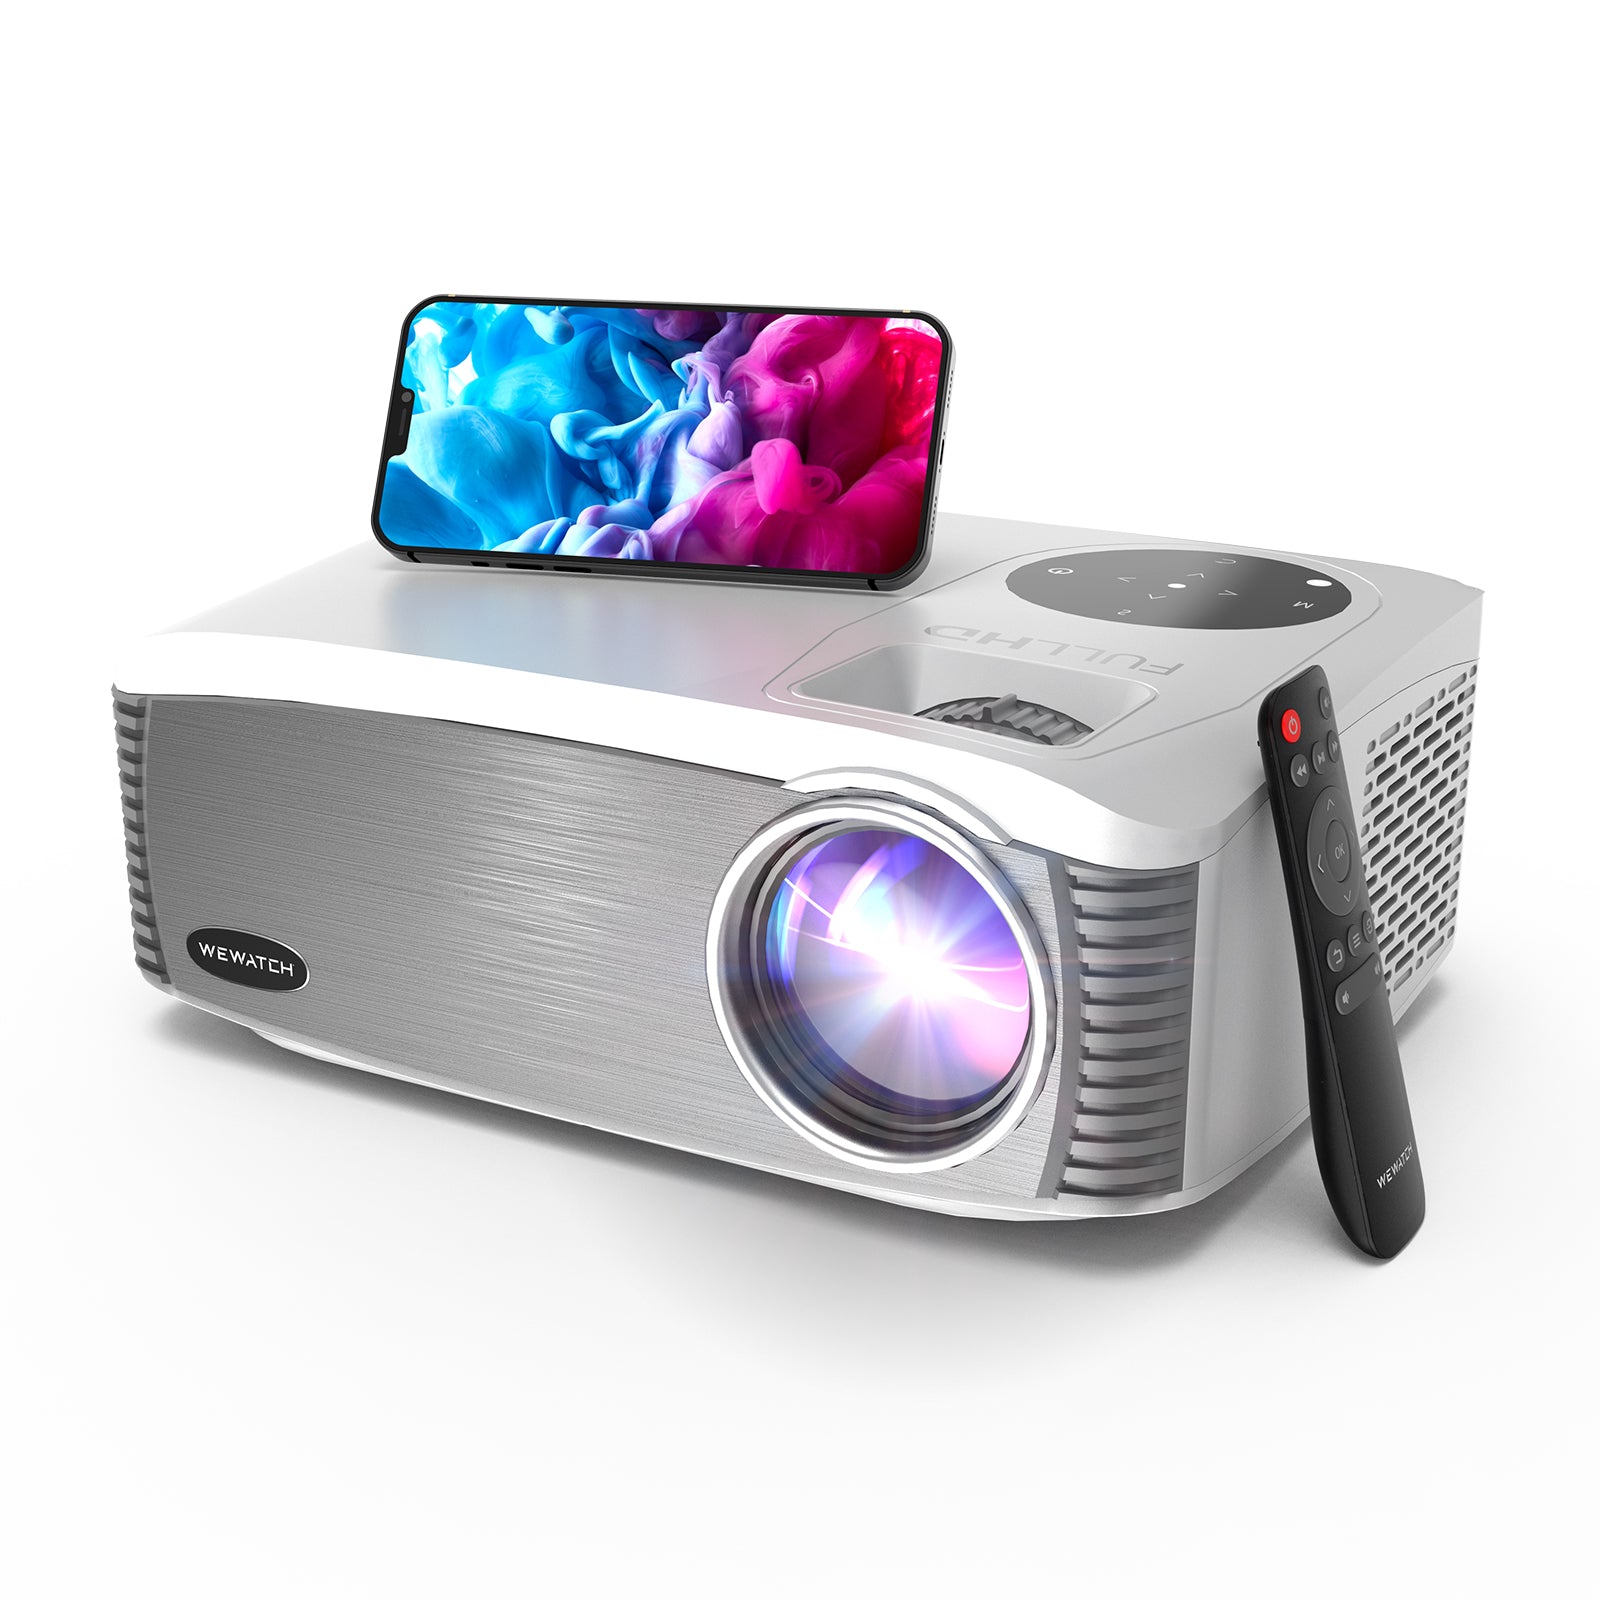 WEWATCH V70/V70 Pro Projector with remote control